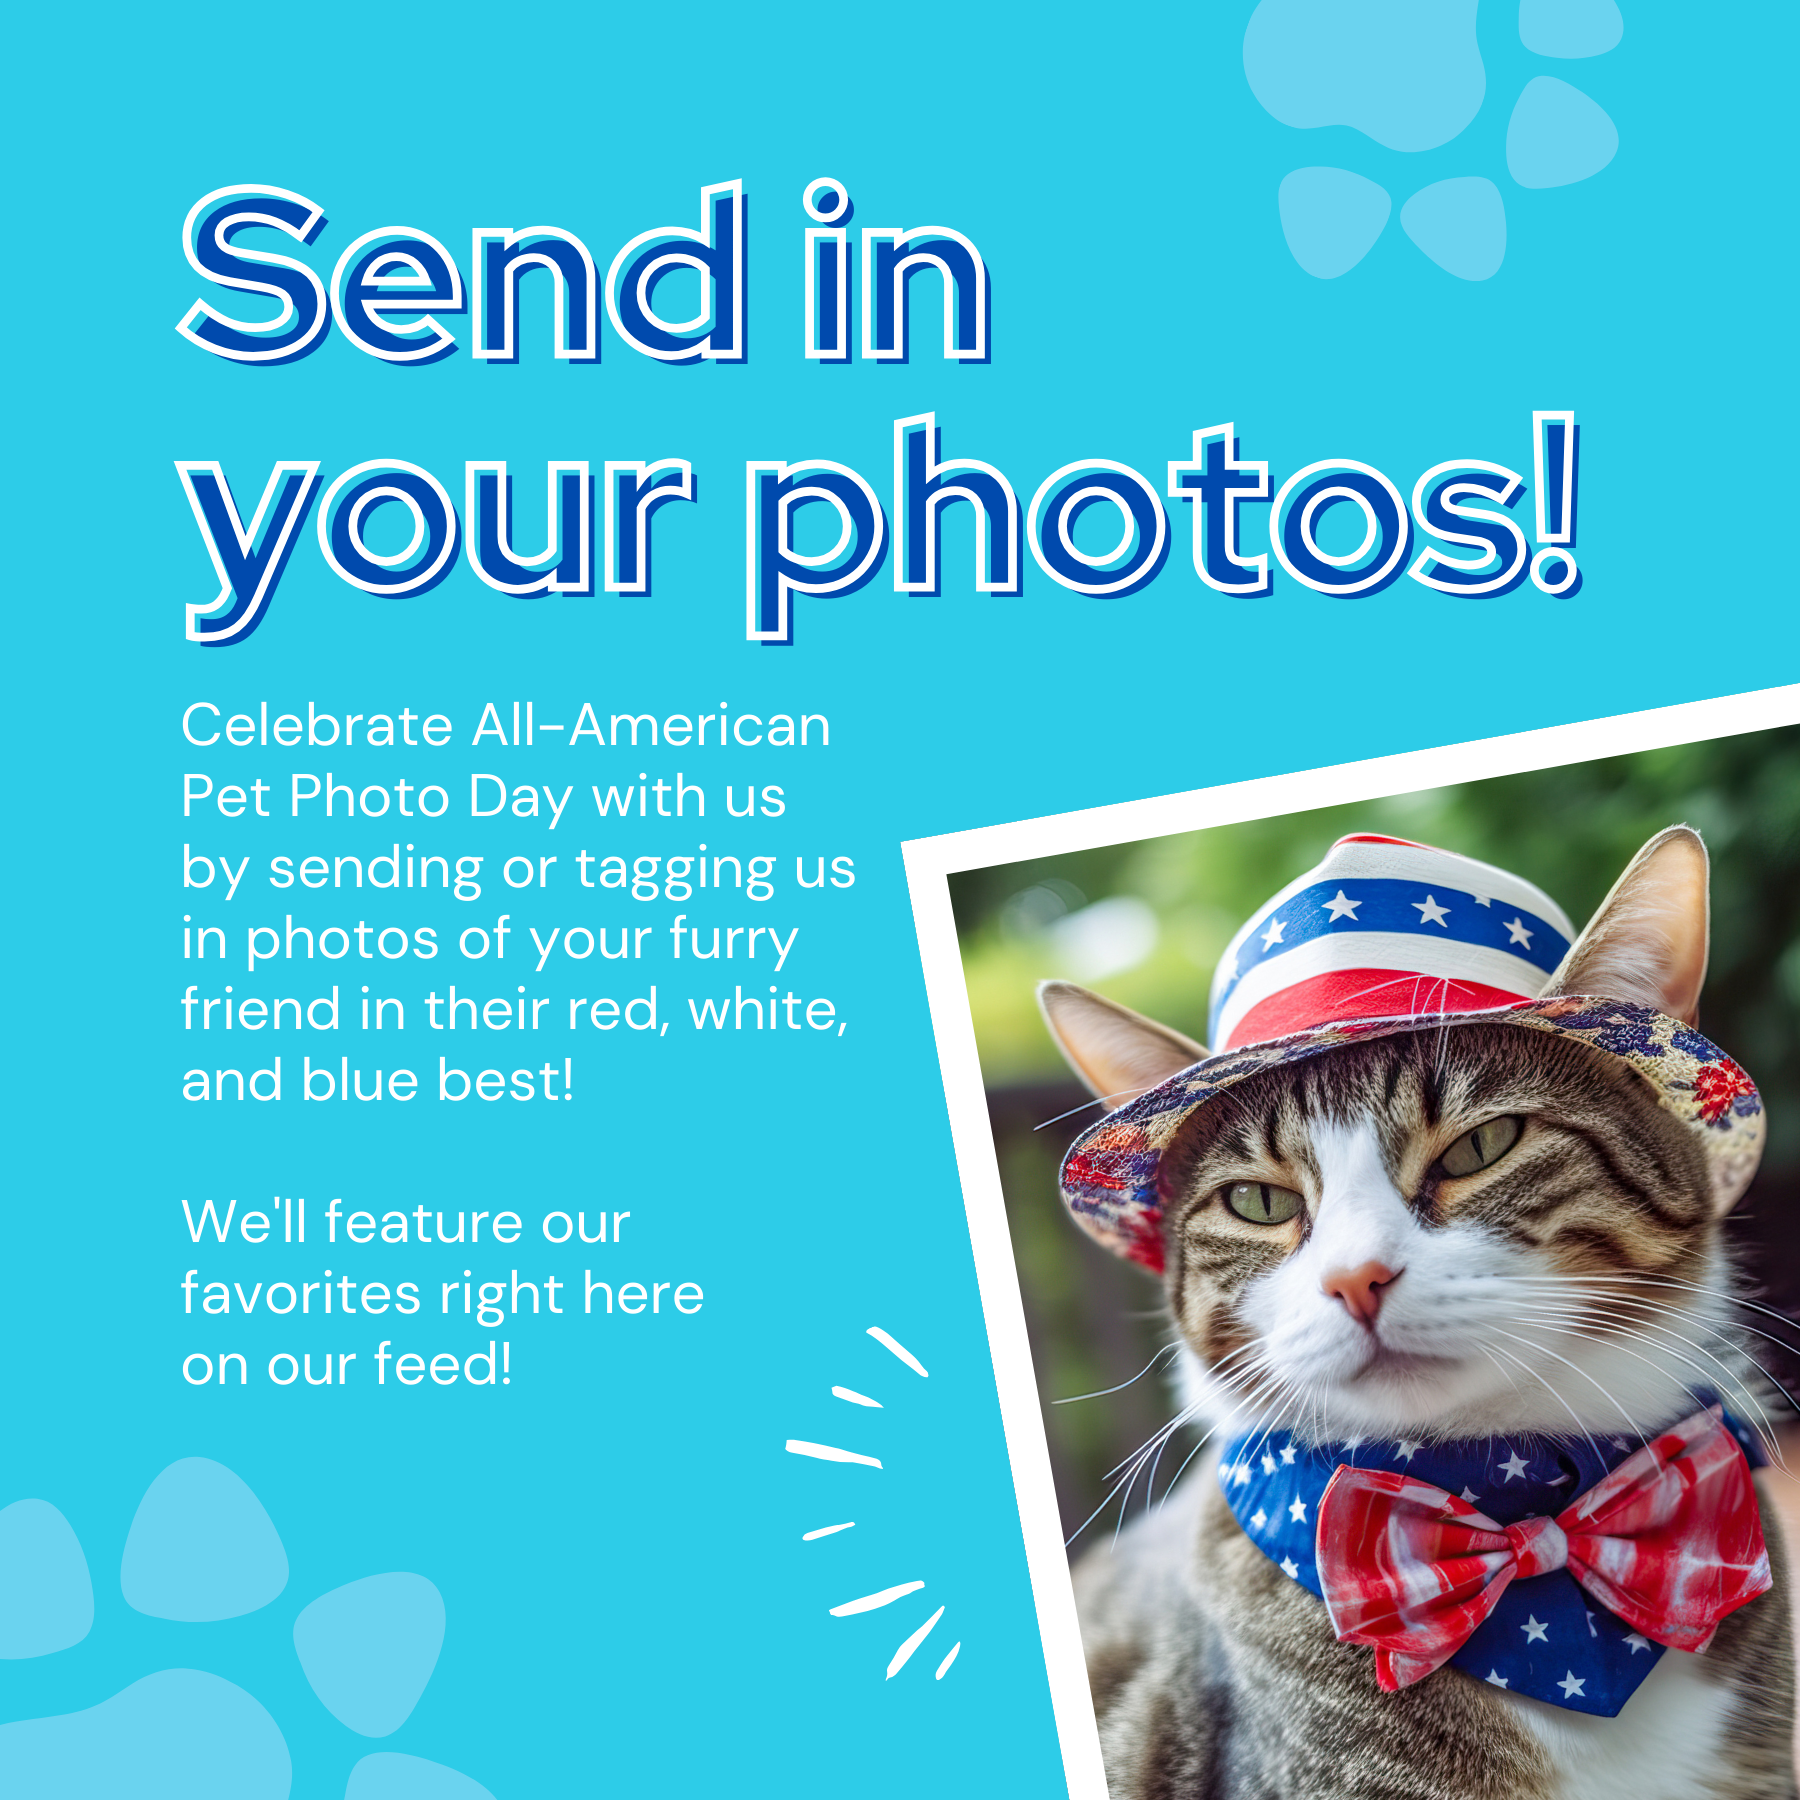 All-American Pet Photo Day